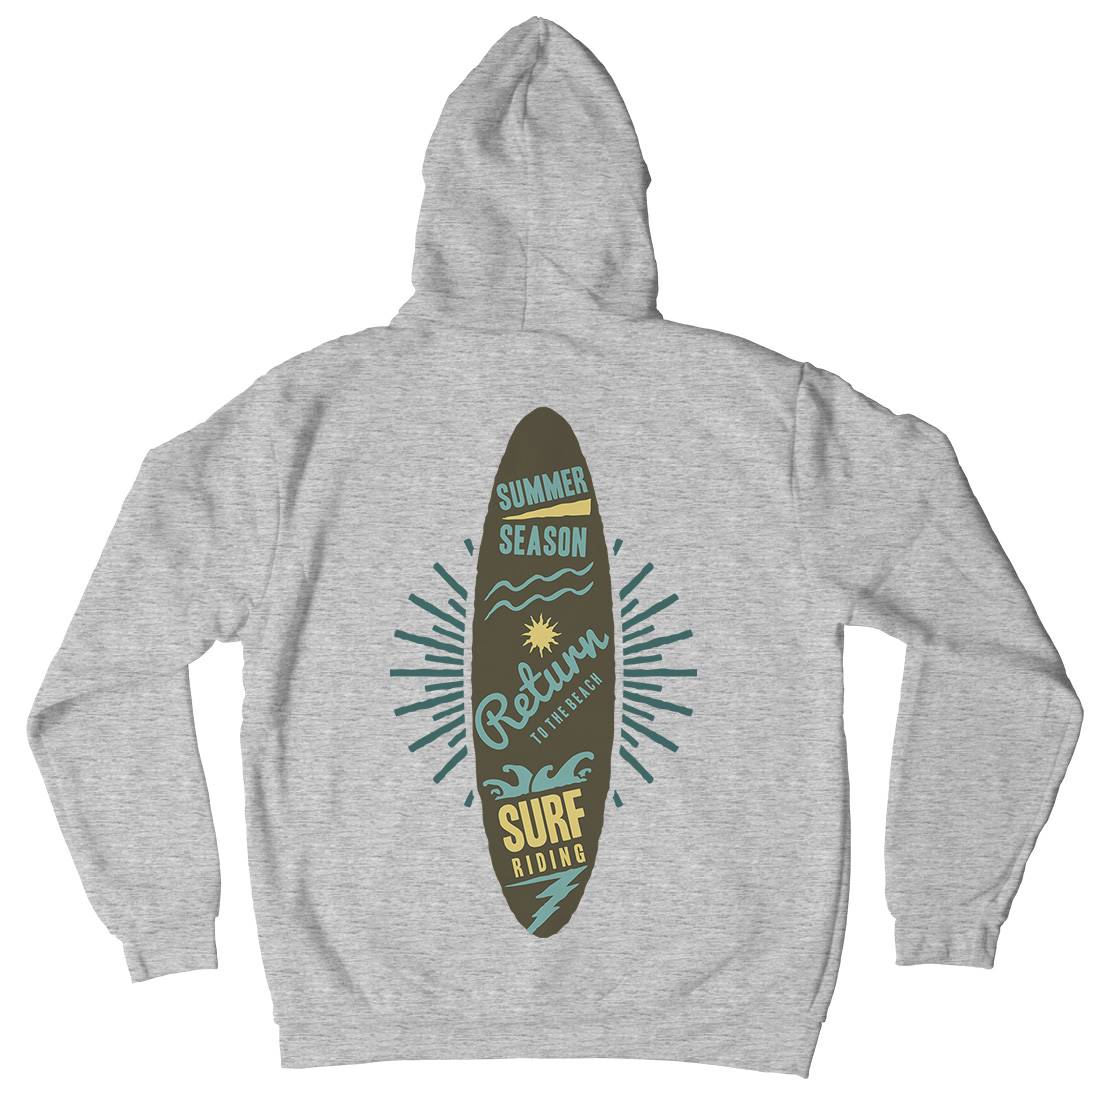 Riding Mens Hoodie With Pocket Surf A373